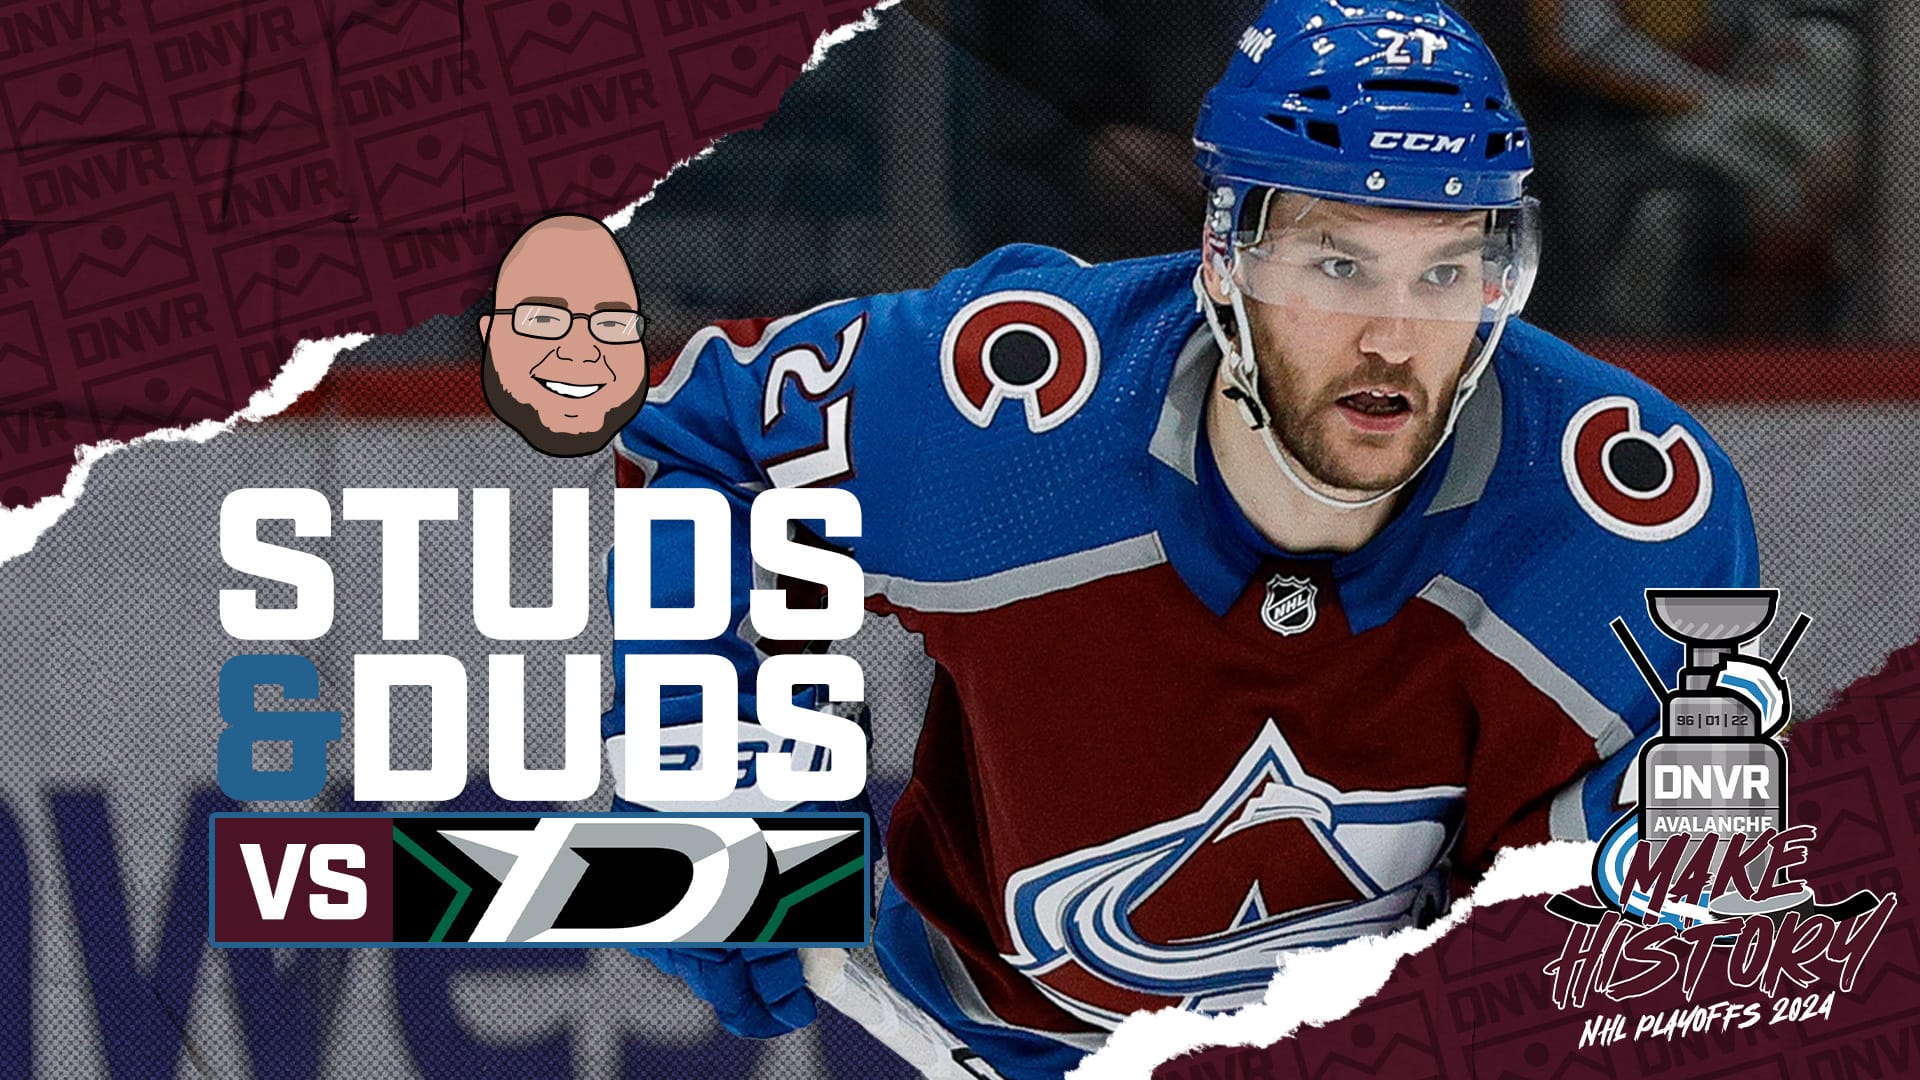 Avs-Stars Ugly Game 4 Studs & Duds